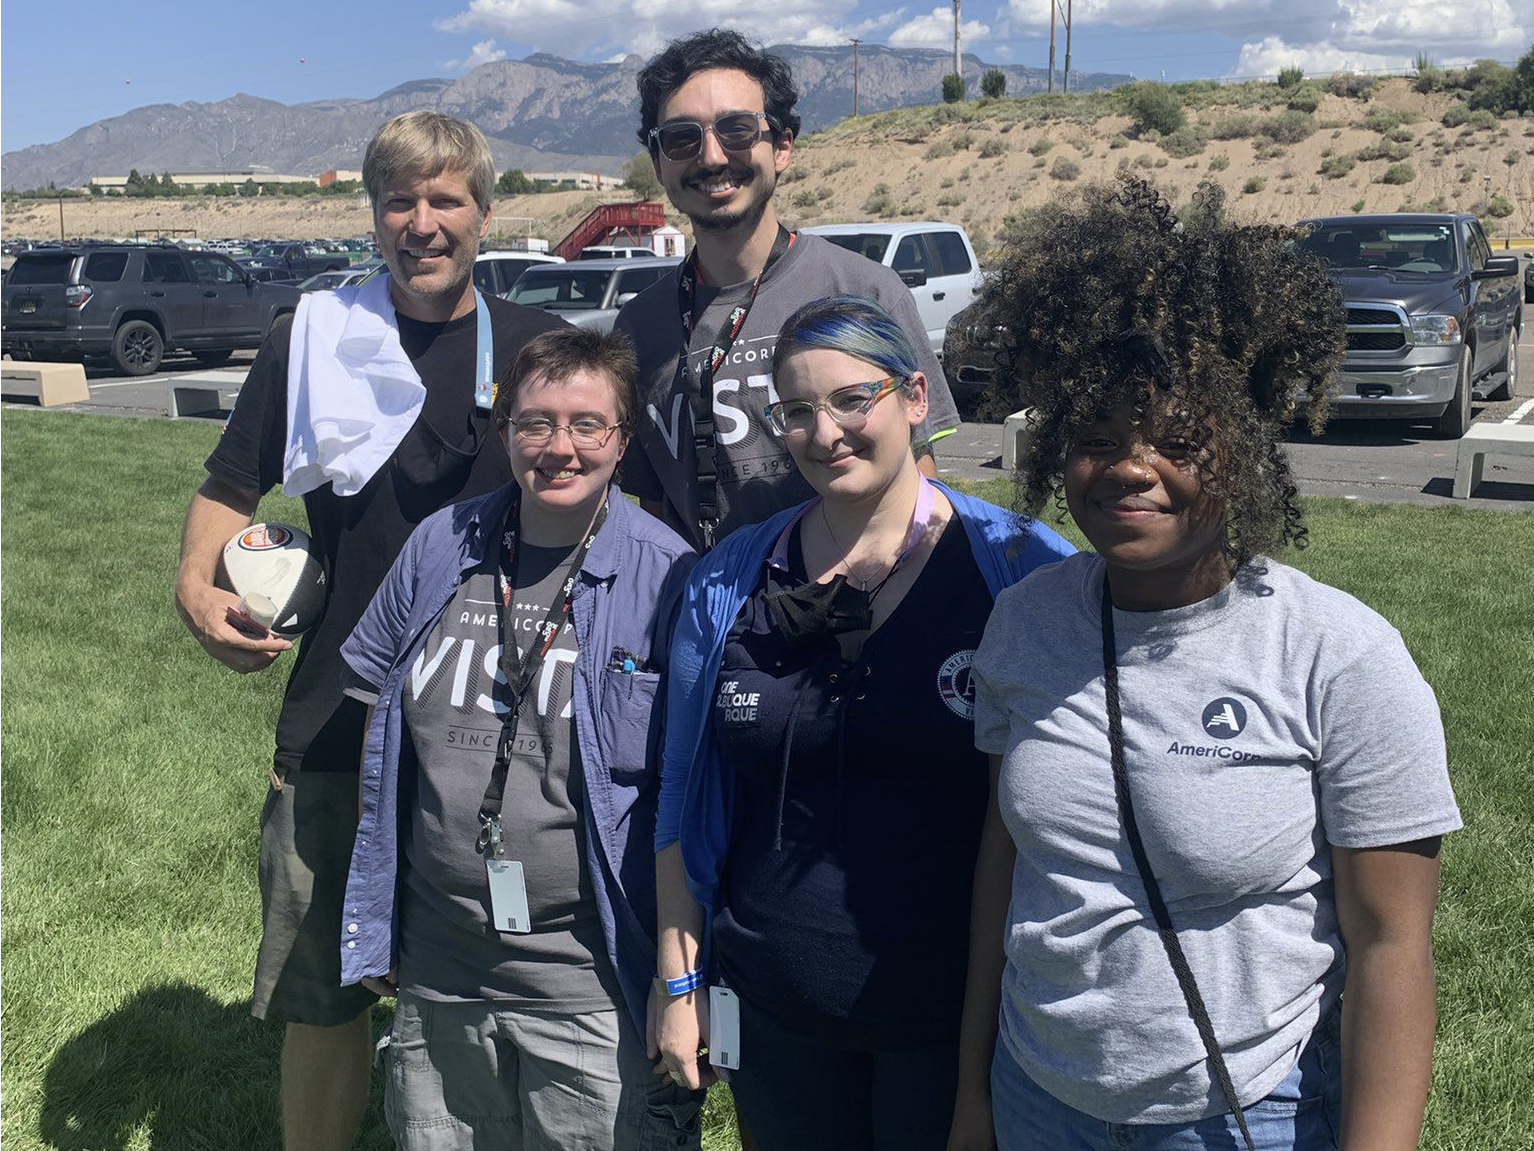 5 people posing for a photo, facing the viewer. 2 people in the back, on the left side of the image with 3 individuals in front, on the right side of the image. Mountains, a hill, a parking lot, and grass are in the background.